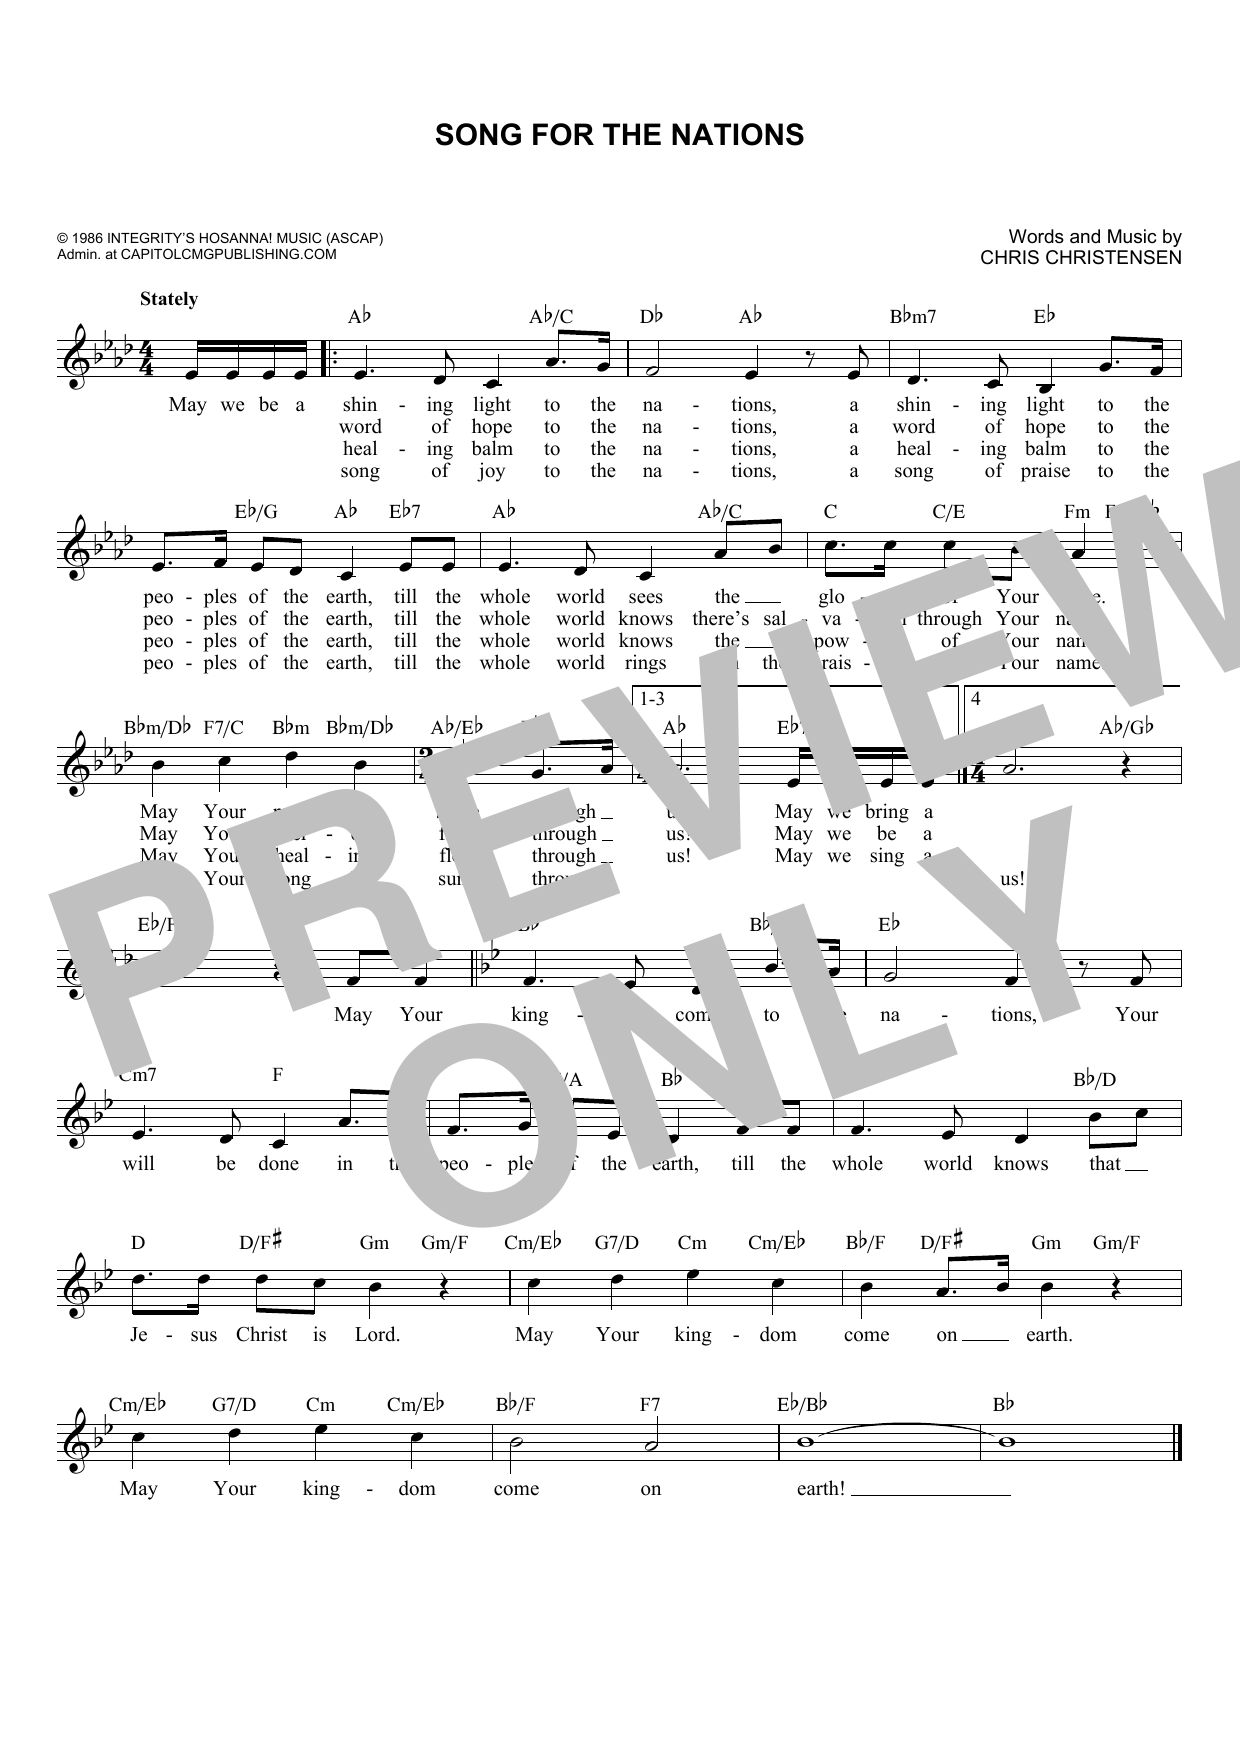 Download Chris Christensen Song For The Nations Sheet Music